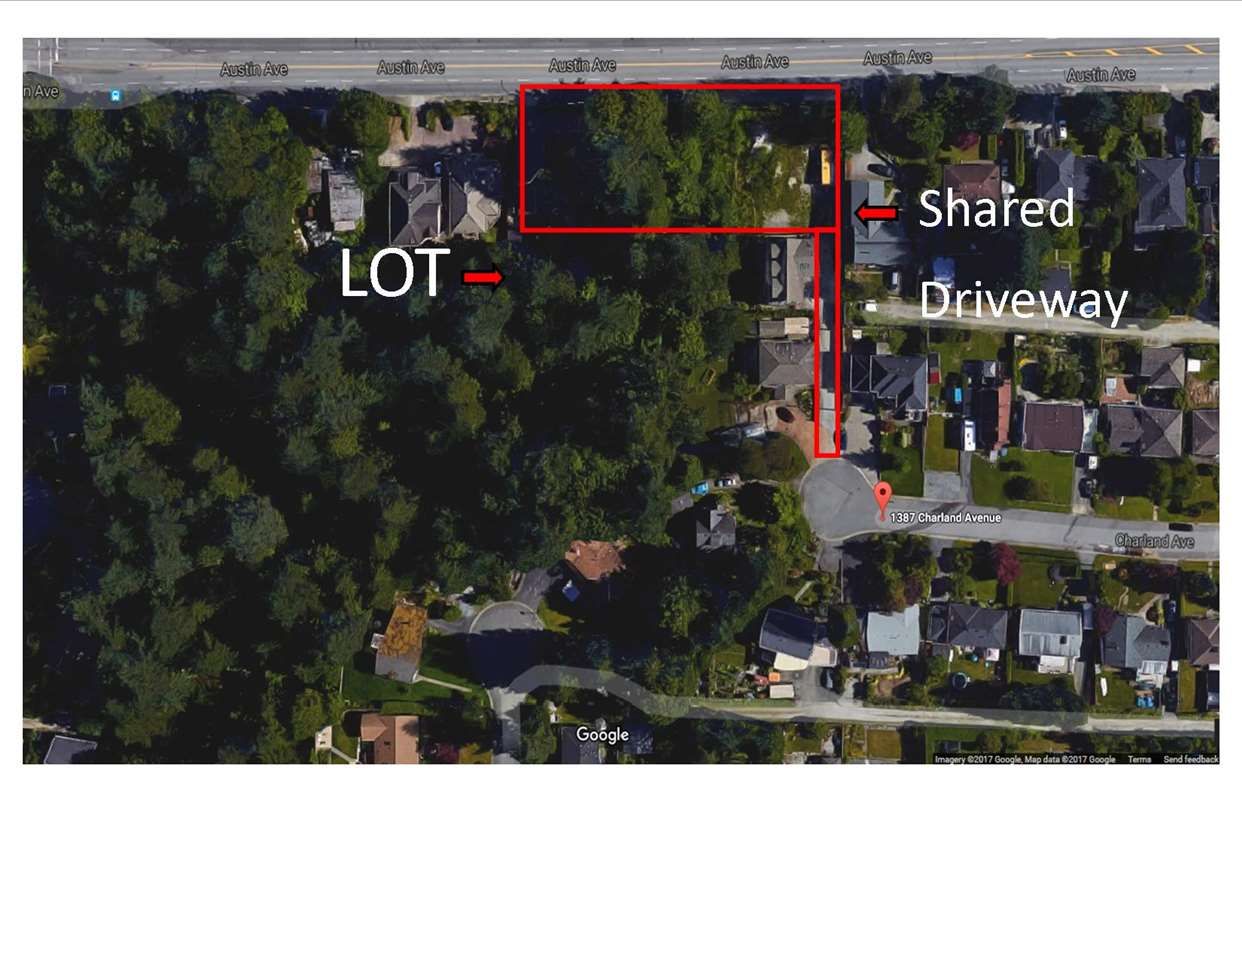 Main Photo: 1387 CHARLAND AVENUE in : Central Coquitlam Land for sale : MLS®# R2131636